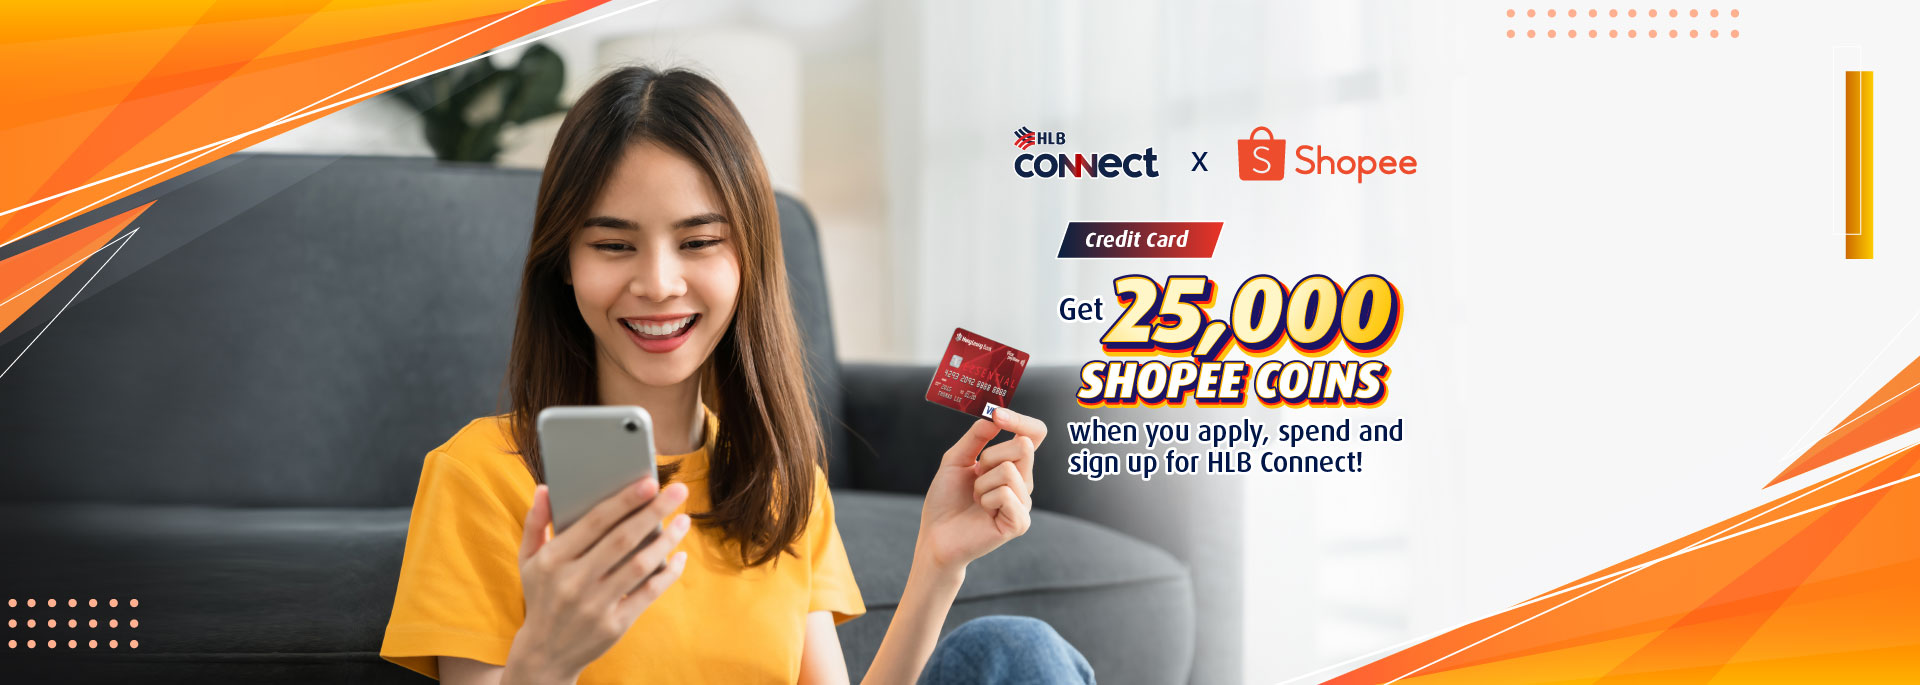 25,000 Shopee Coins up for grabs! Apply & spend with your new HLB Credit Card via HLB